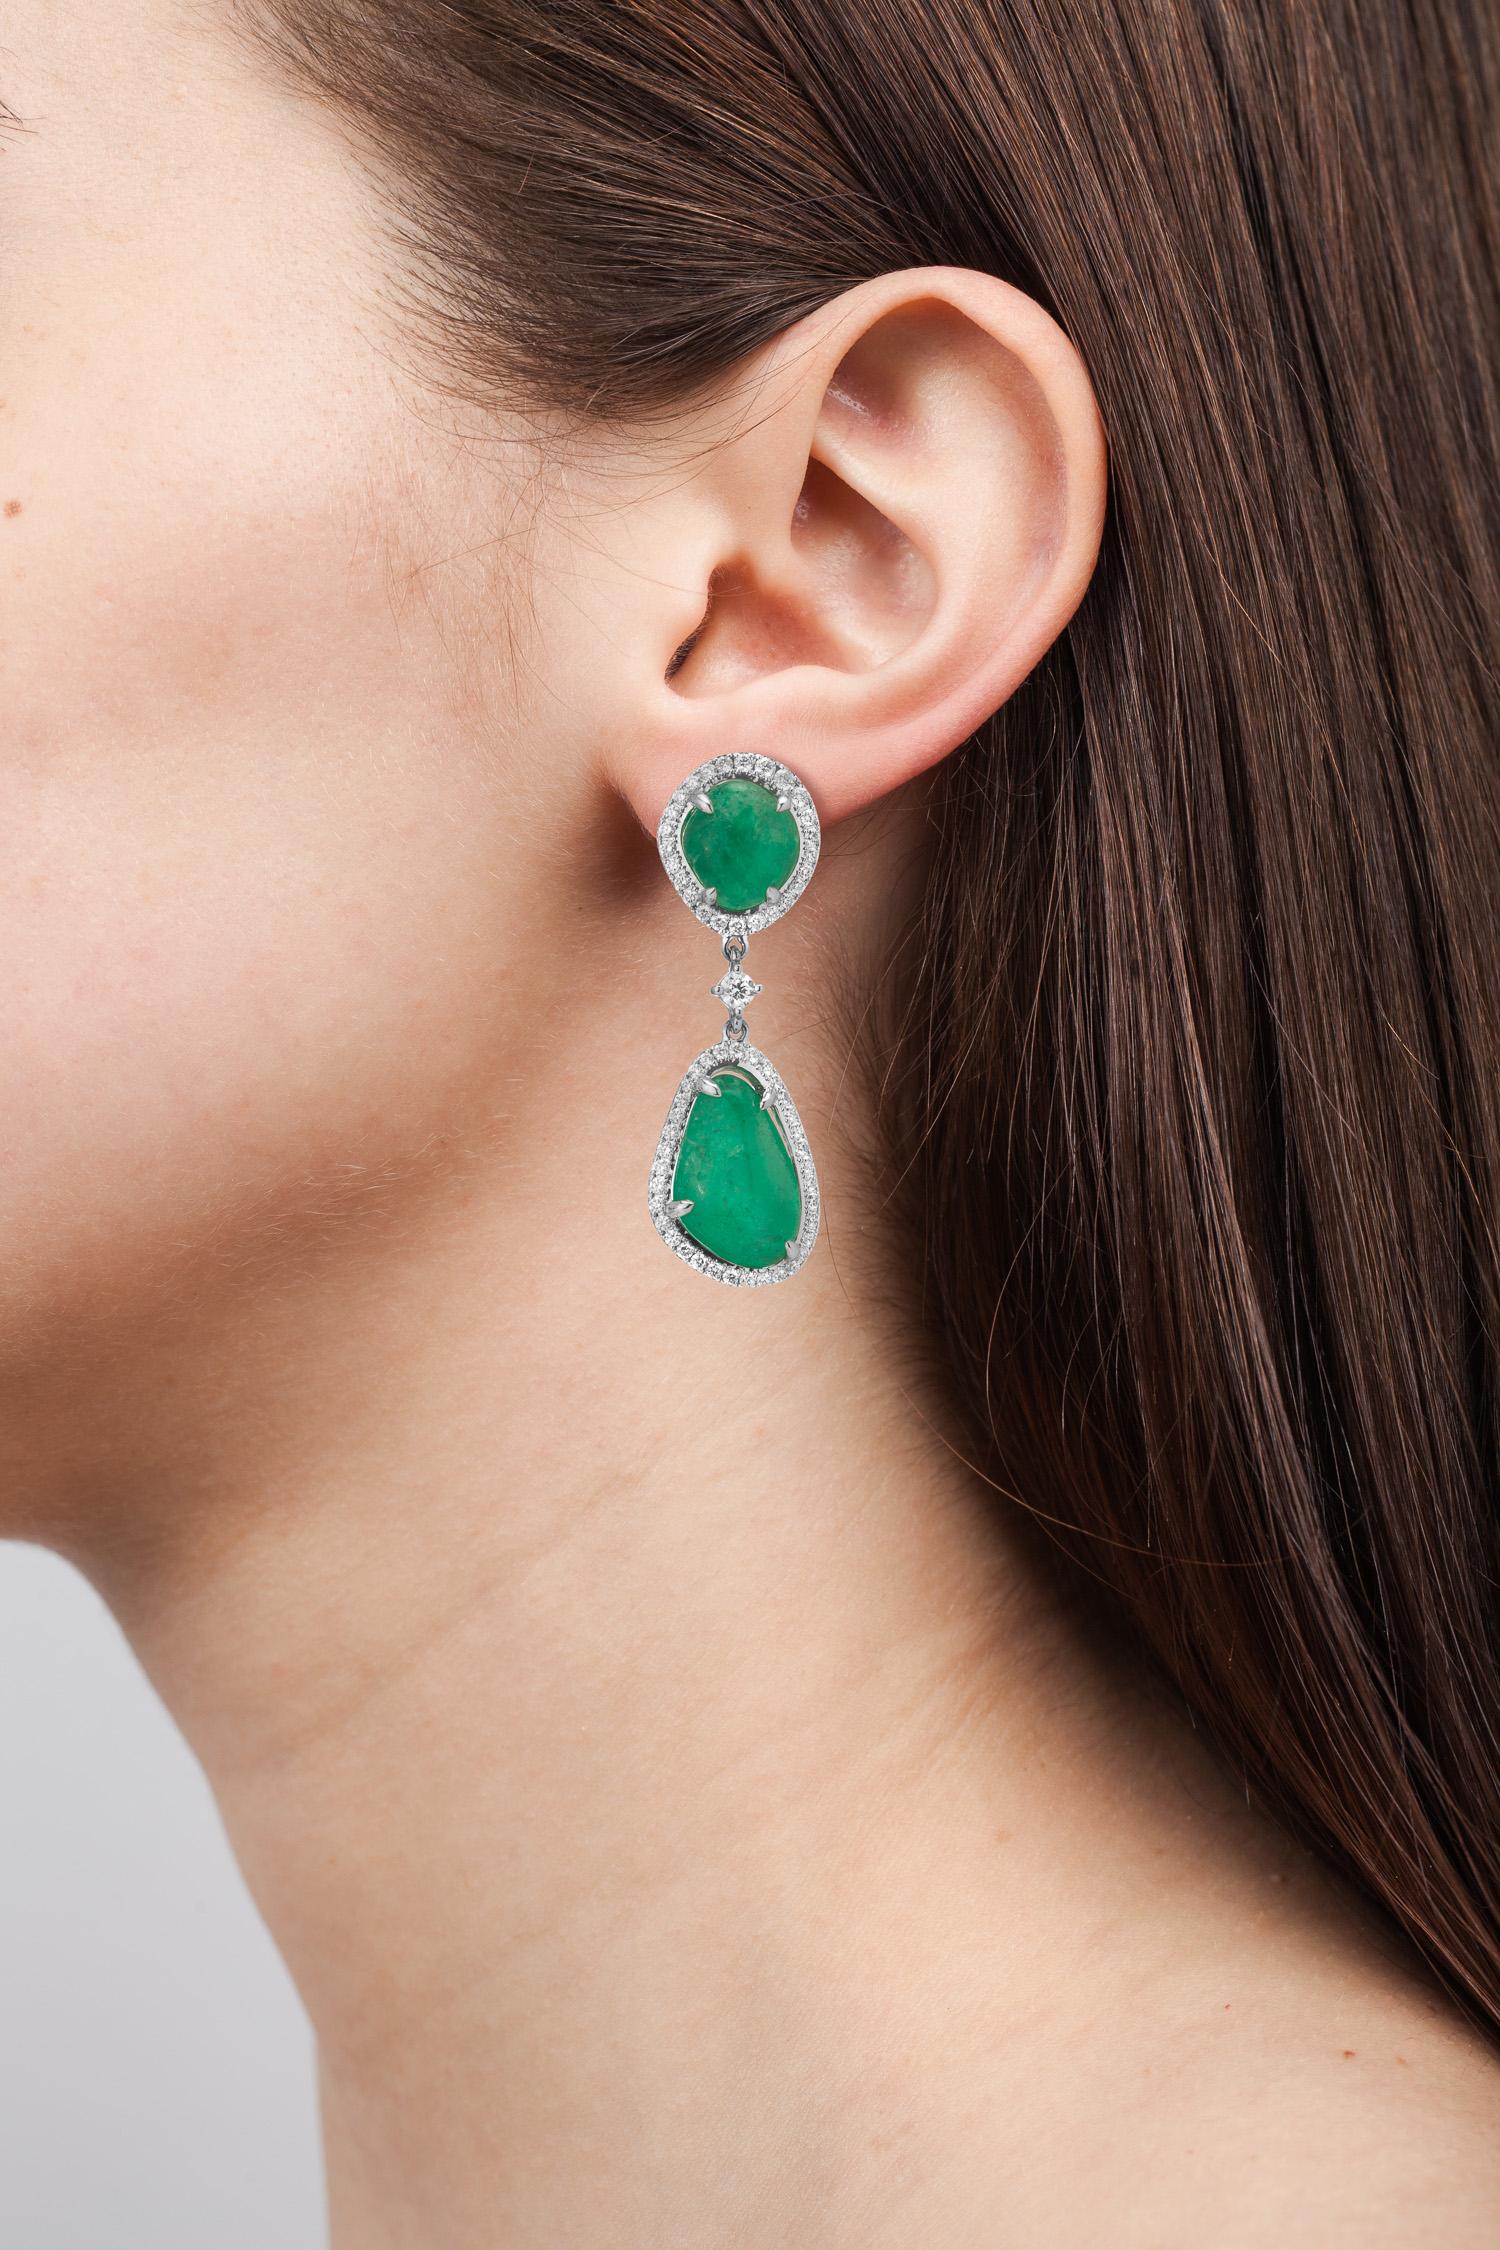 Muzo Emerald Colombia Heritage Verity Earrings set with 25.41 carats Emerald

Verity is a tribute to the trade between the Spaniards and Indian Maharajahs, two unique cultures that share a passion for gilded treasures and precious emerald